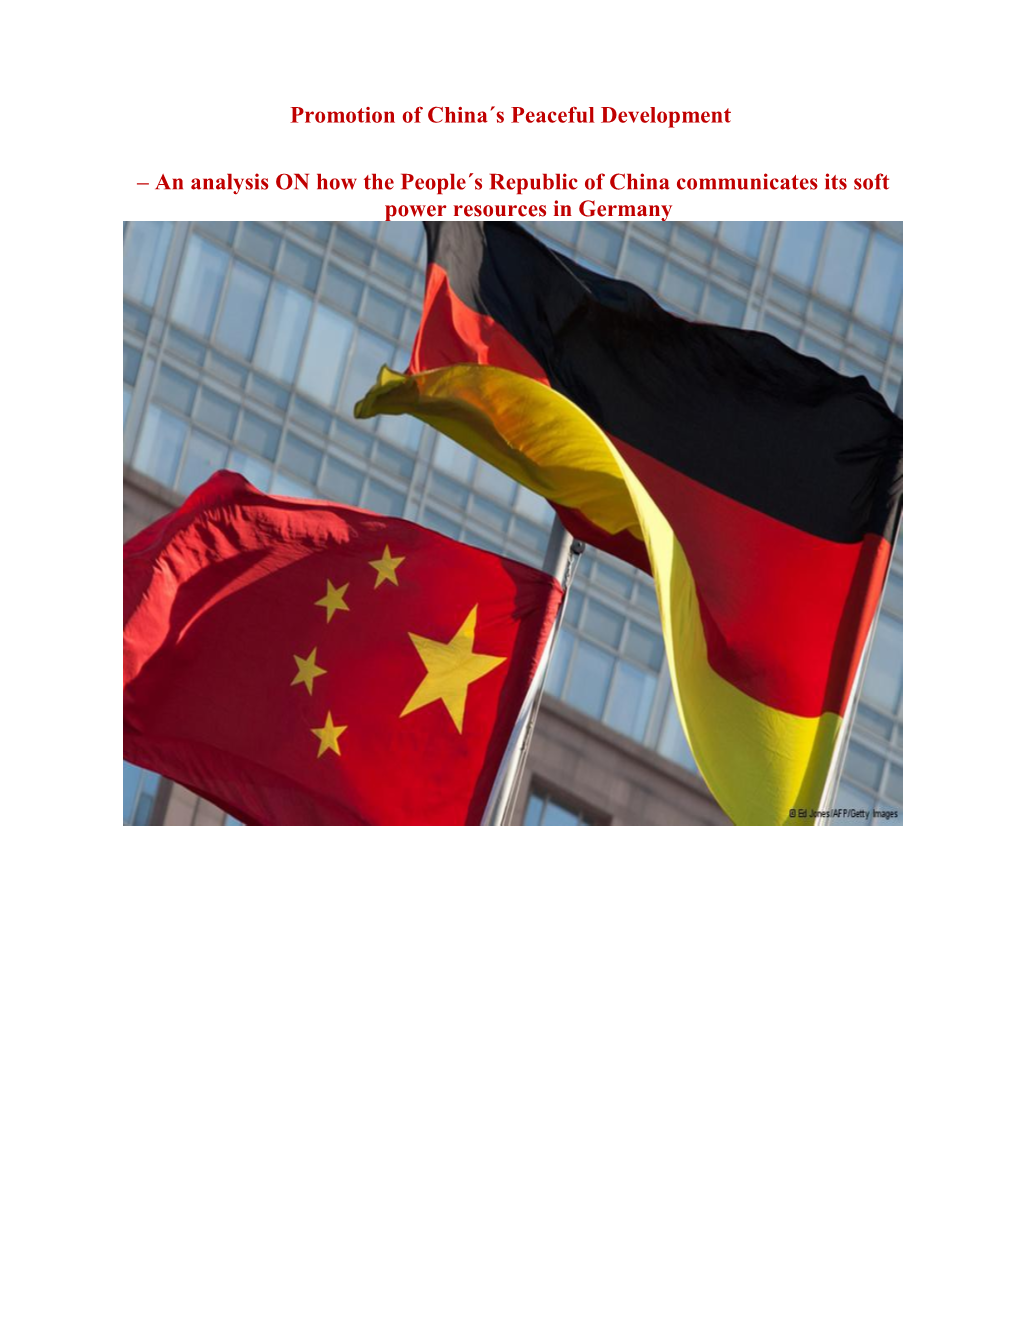 China S Soft Power in Germany